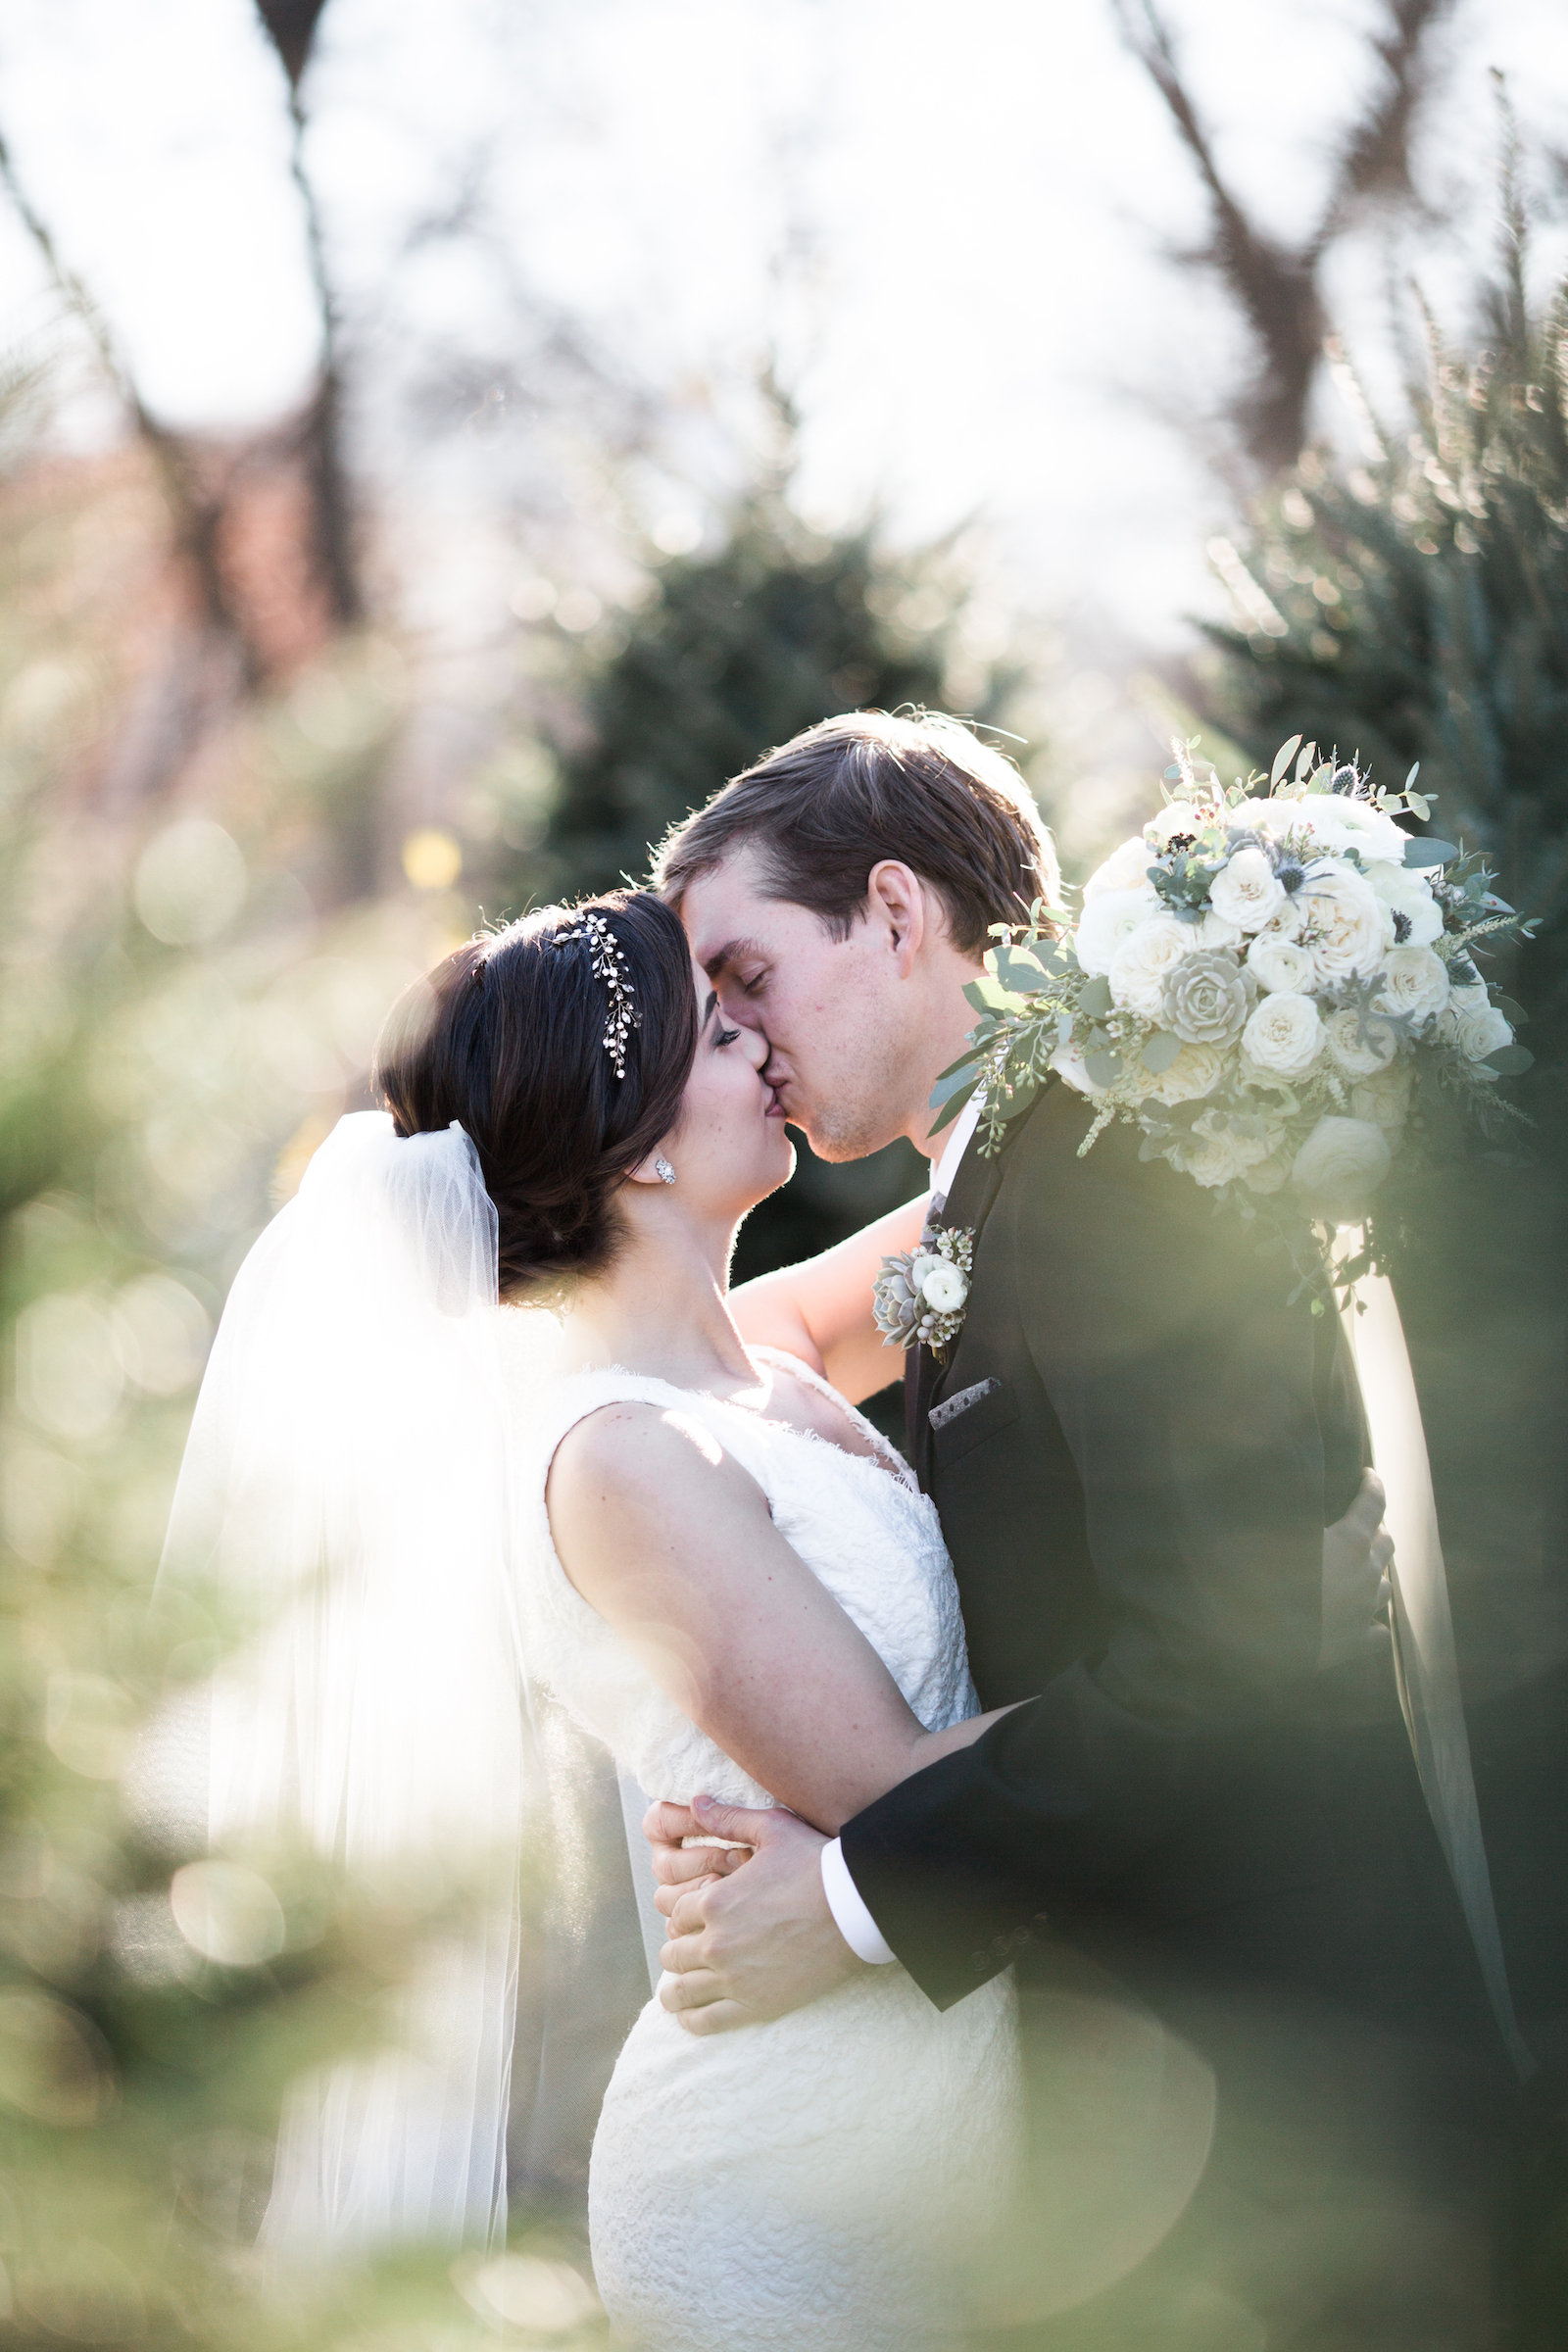 Newlywed portraits at a Christmas tree lot // Nashville Floral Design